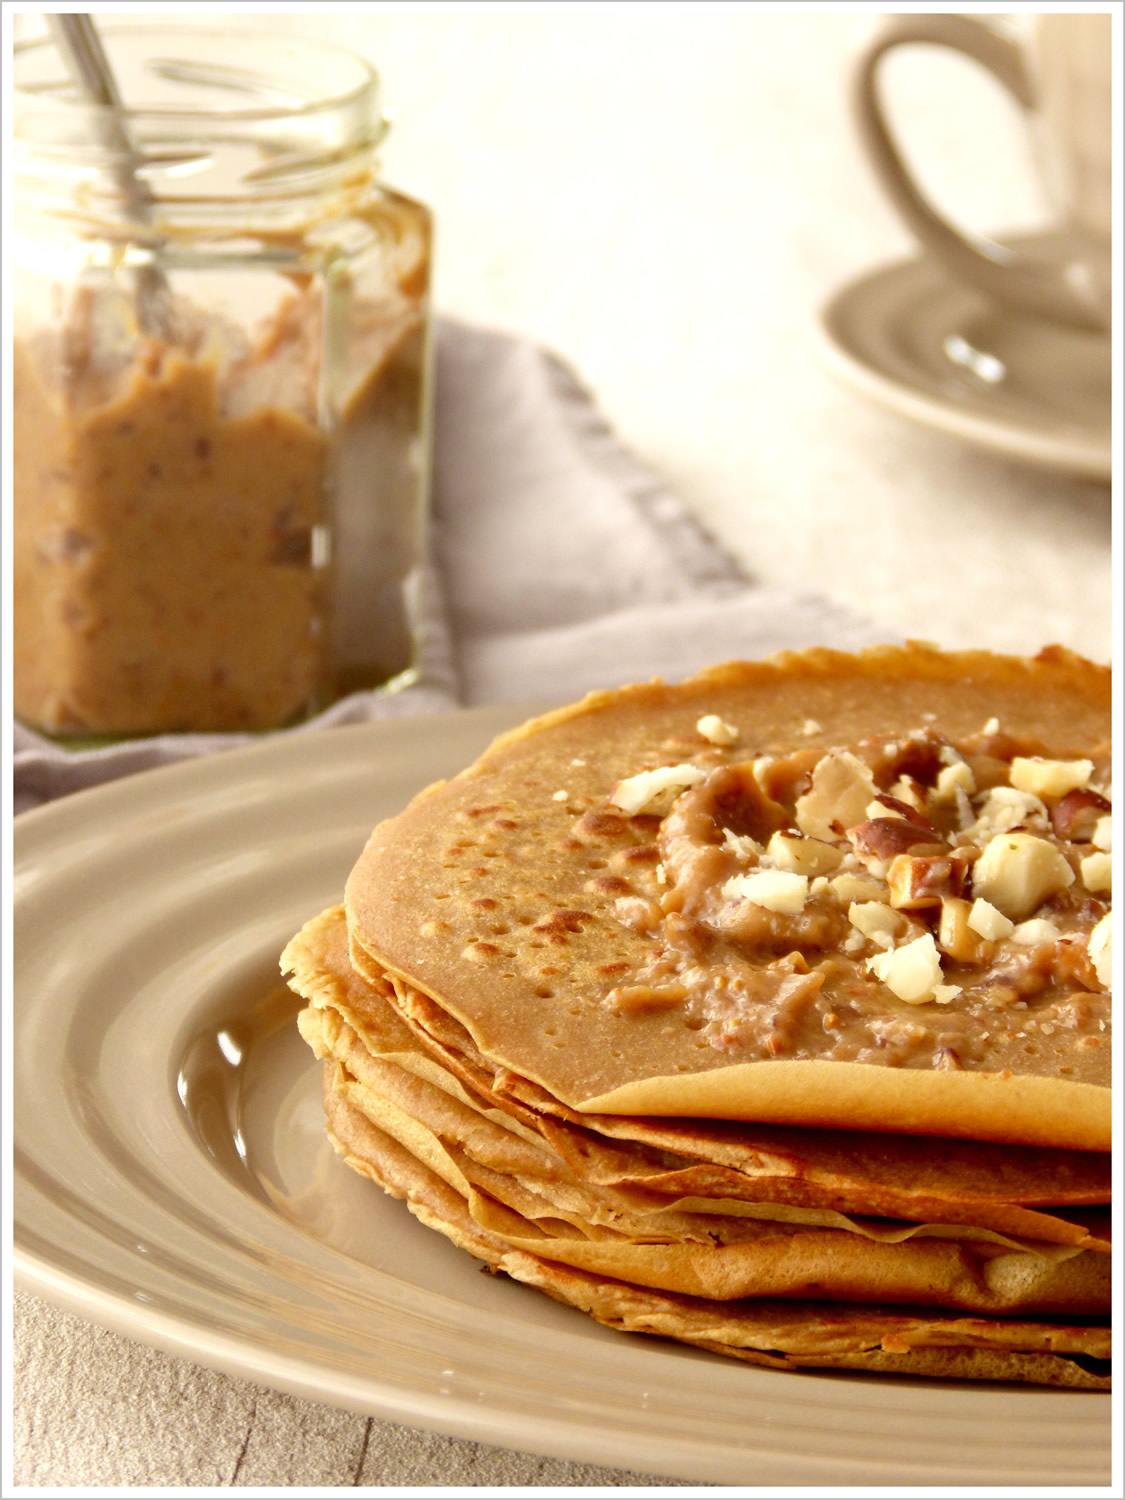 Pancakes with chestnut flour and dried fruit spread